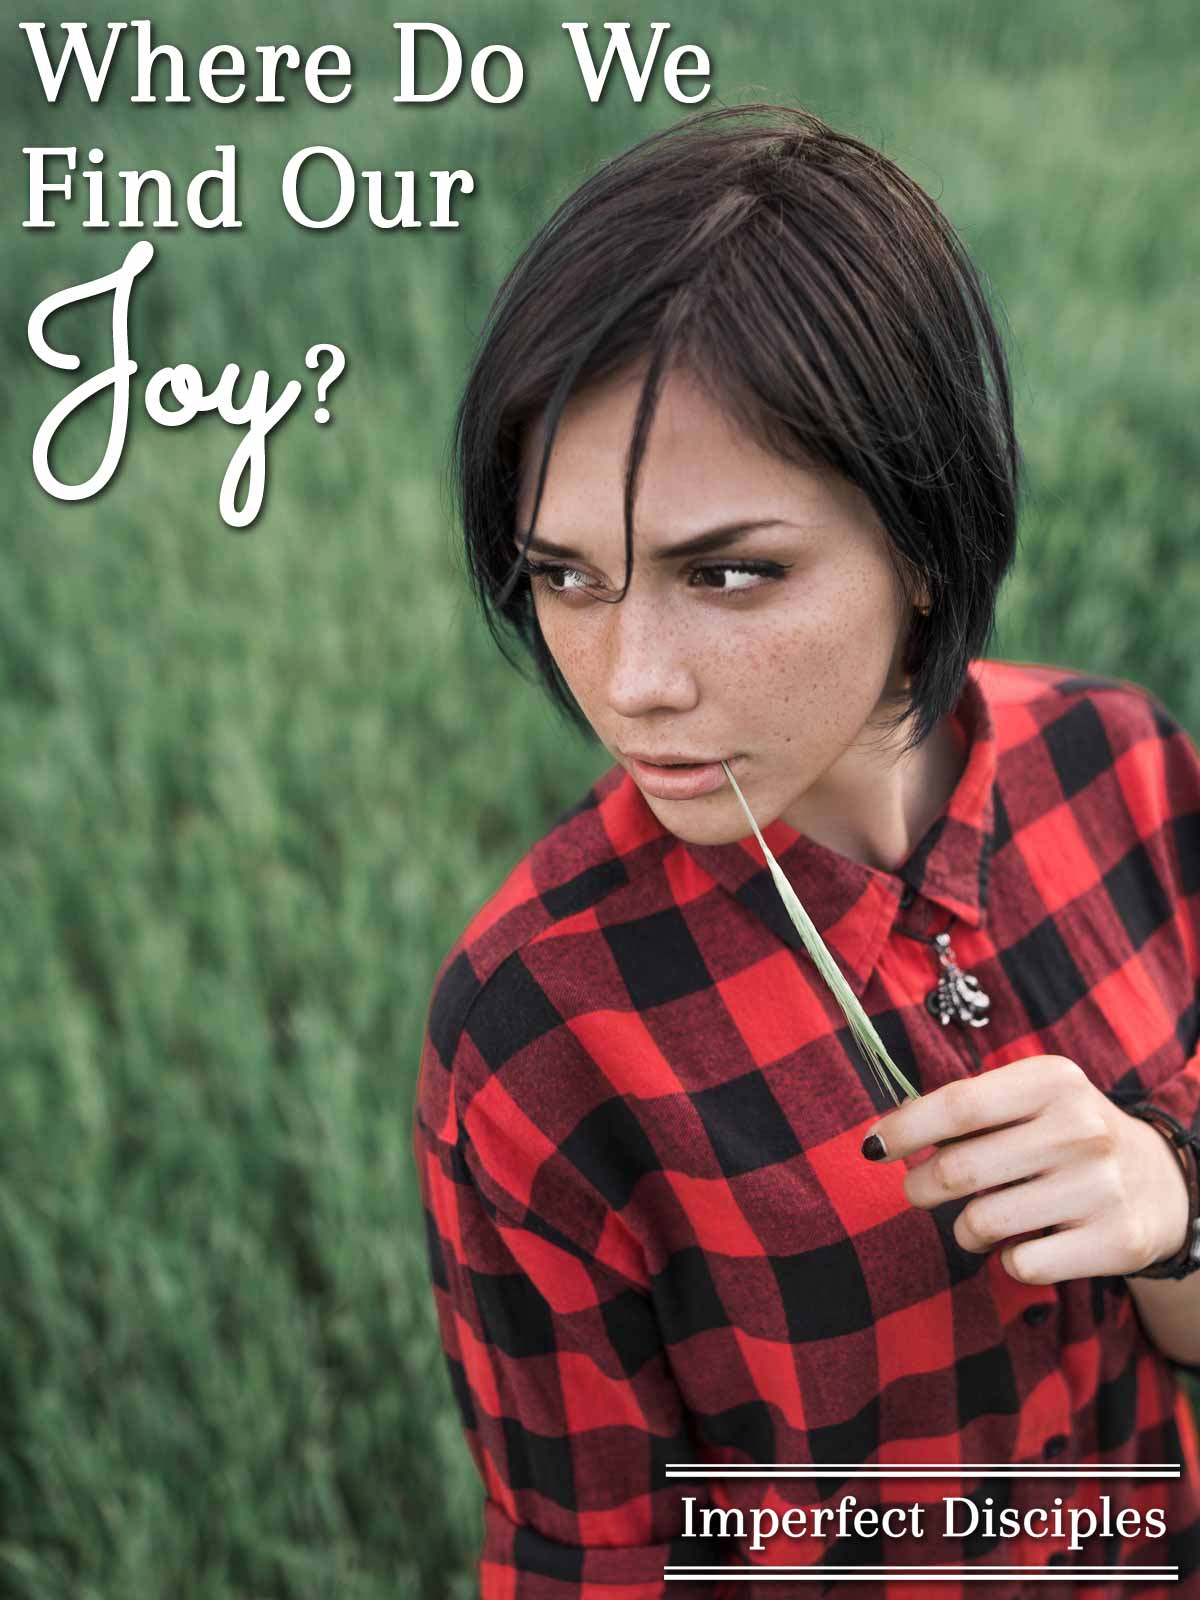 Where do we Find Our Joy?